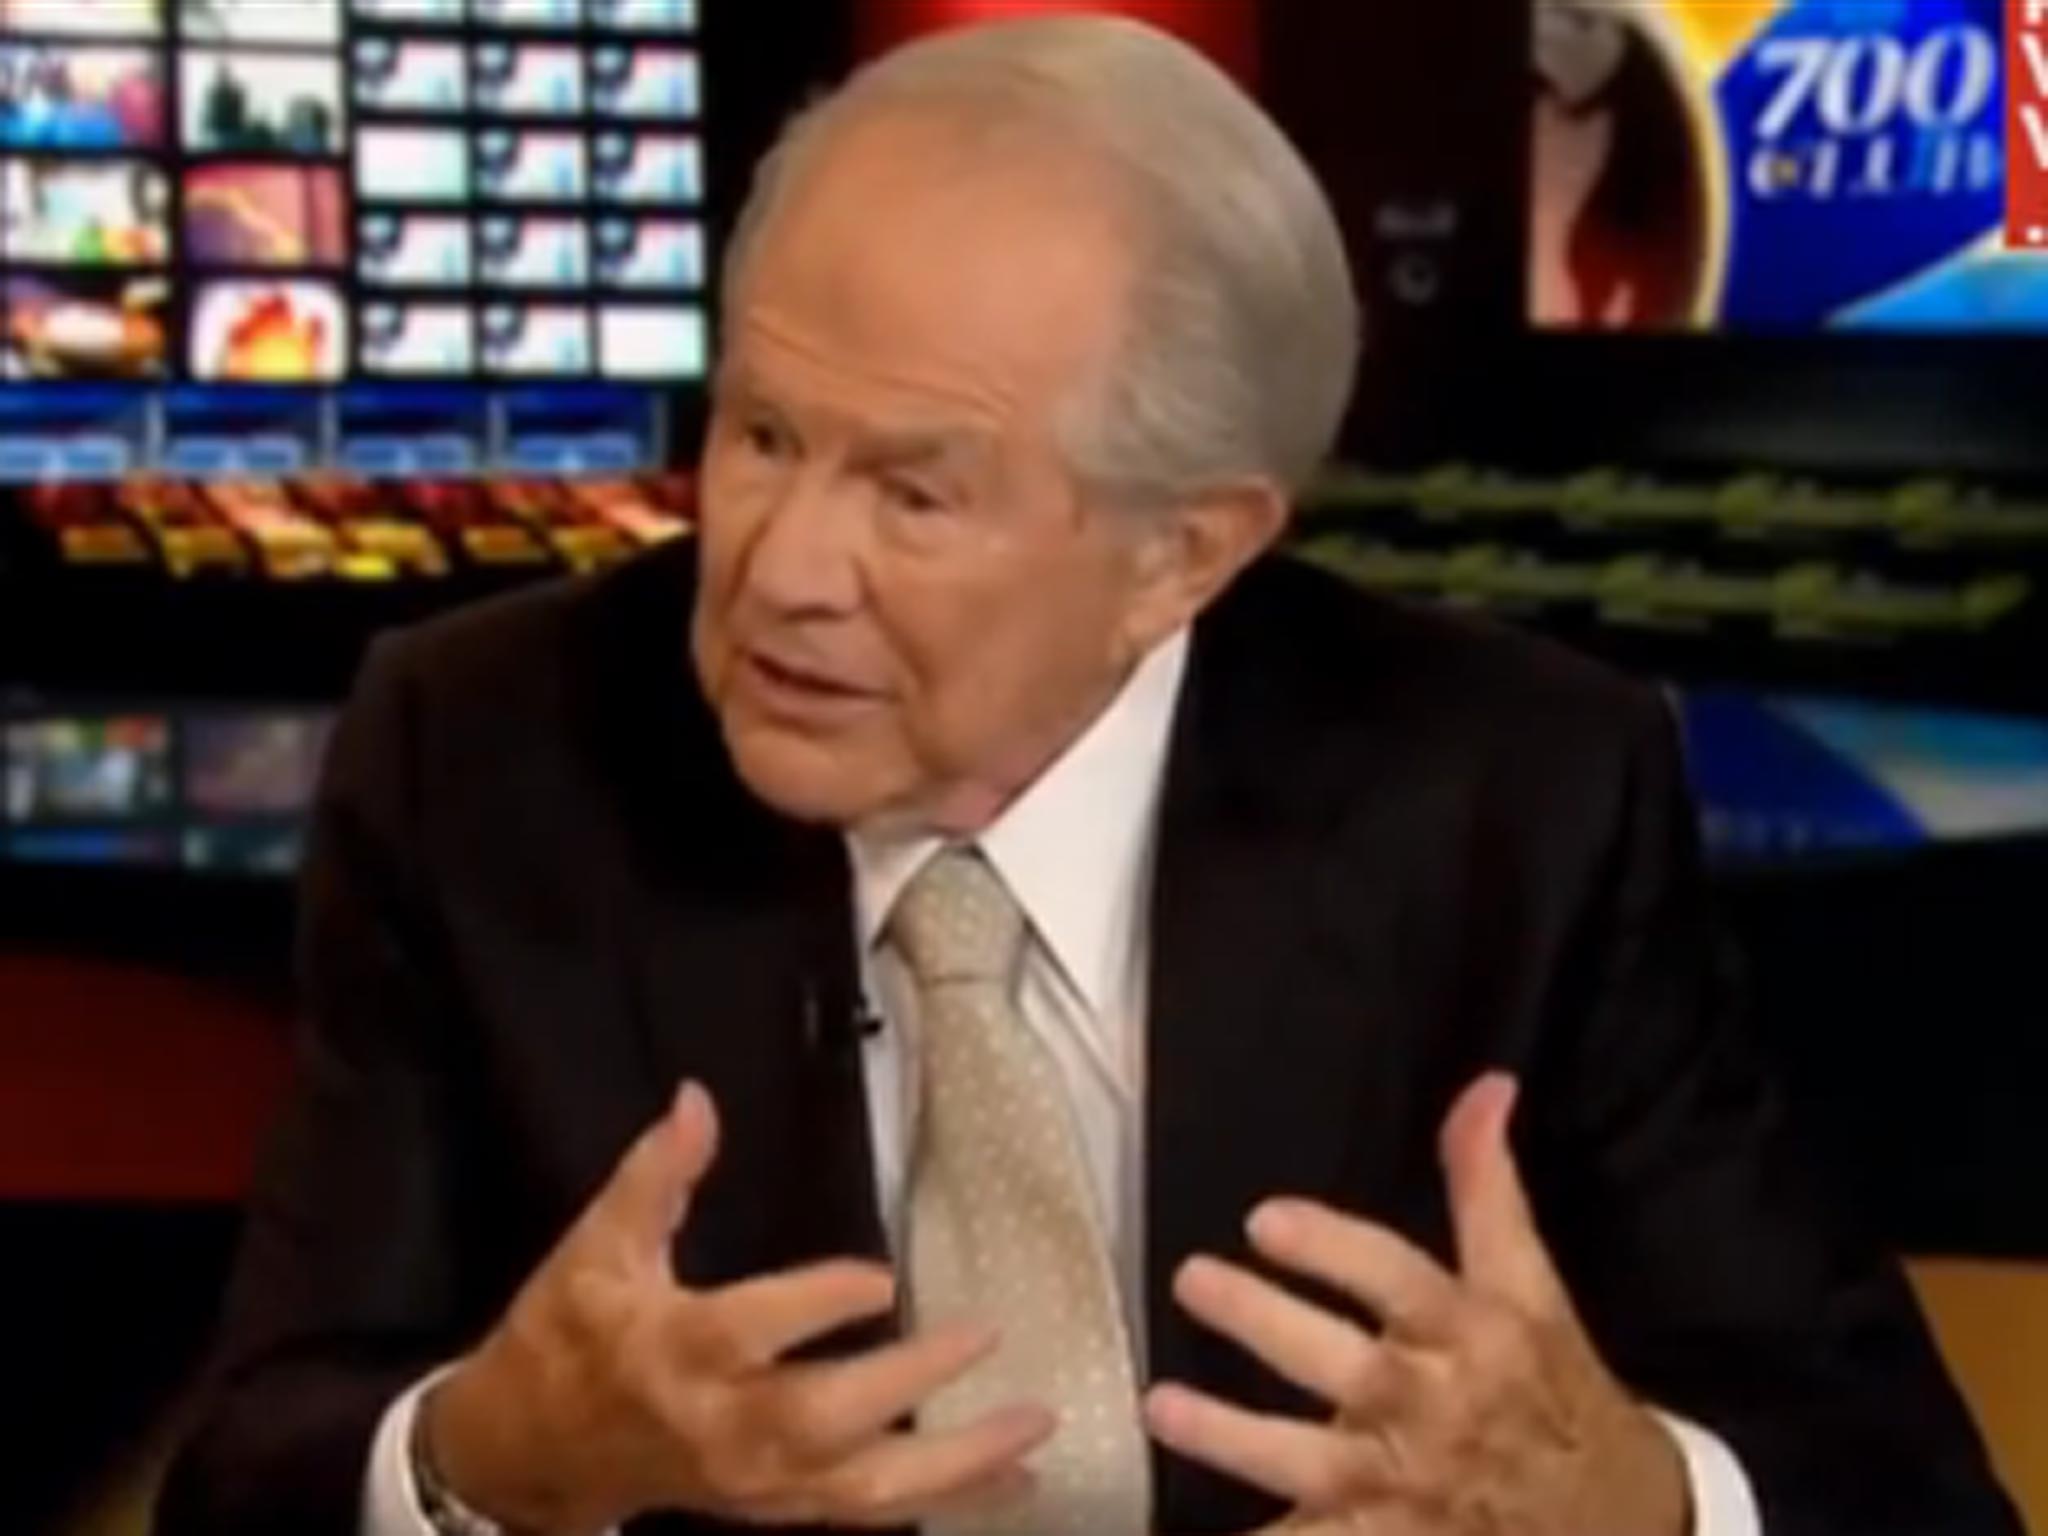 Pat Robertson latest controversial claims are that gays will 'die out because they don't reproduce'